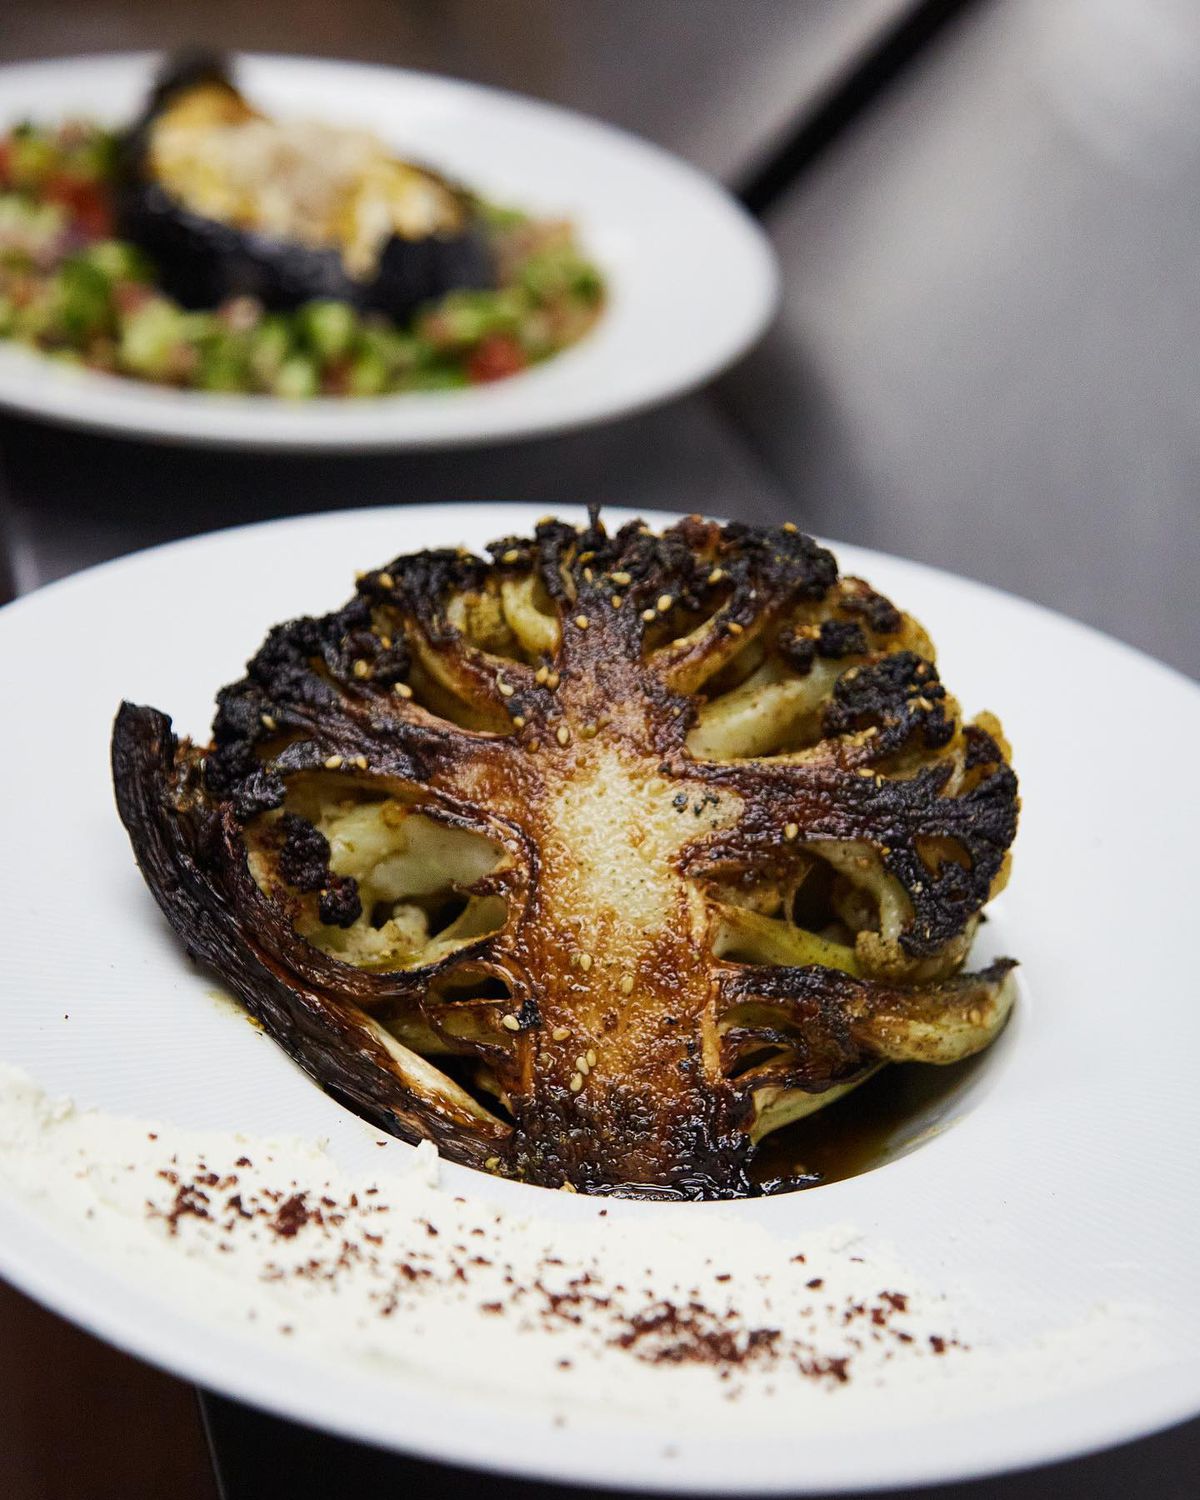 A head of cauliflower is roasted whole in a brick oven and served alongside house labneh and doused in za’atar spice, creating an intoxicating aroma of smoky, earthy herbs from Nur Kitchen on Buford Highway in Atlanta. 